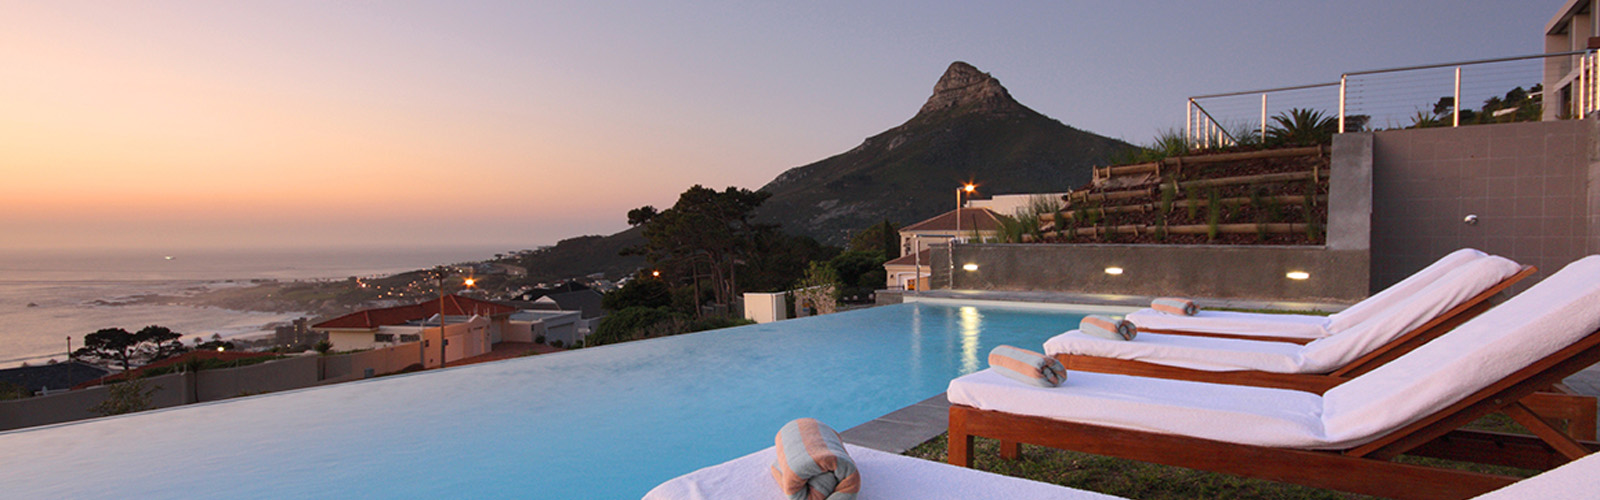 Cape Town Camps Bay Resort